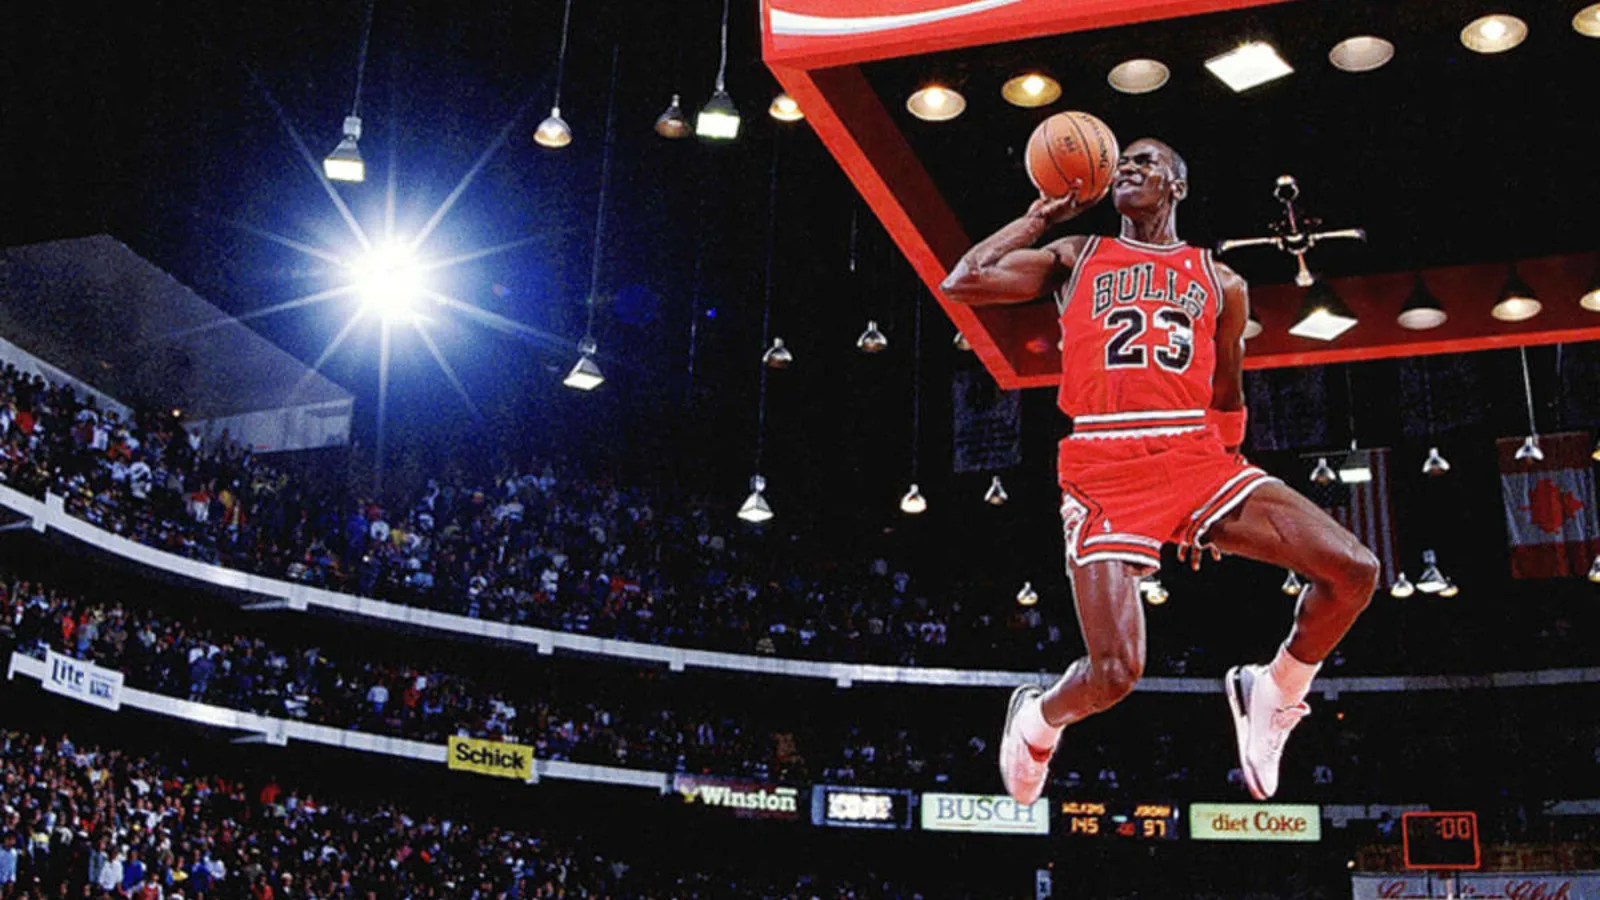  Anthony Edwards: The Rising NBA Star Commanding Attention from Michael Jordan